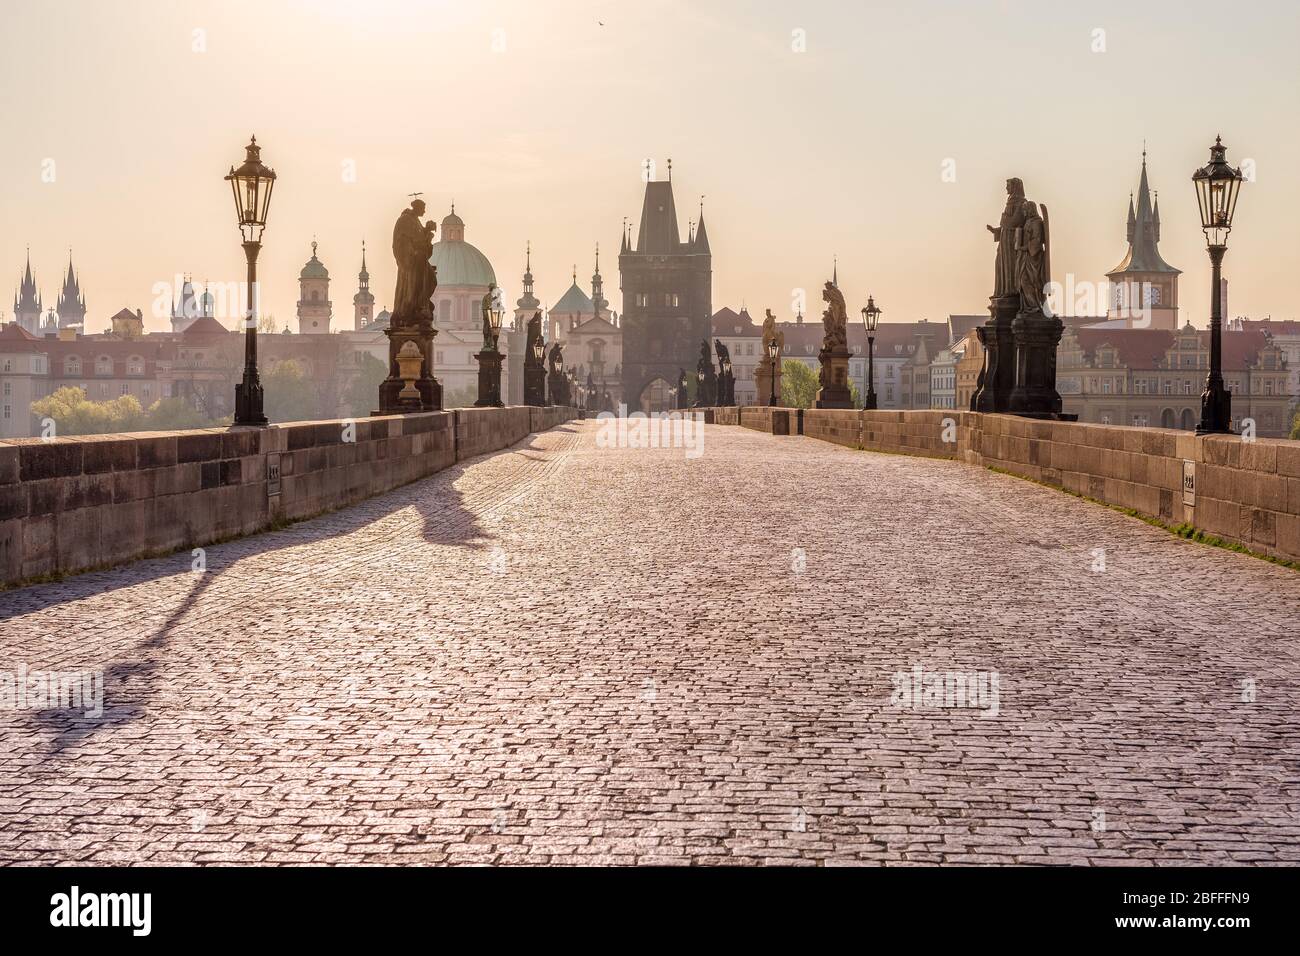 Medieval stone Charles bridge with statues of saints in a thin haze during sunrise, Prague, Czech Republic Stock Photo